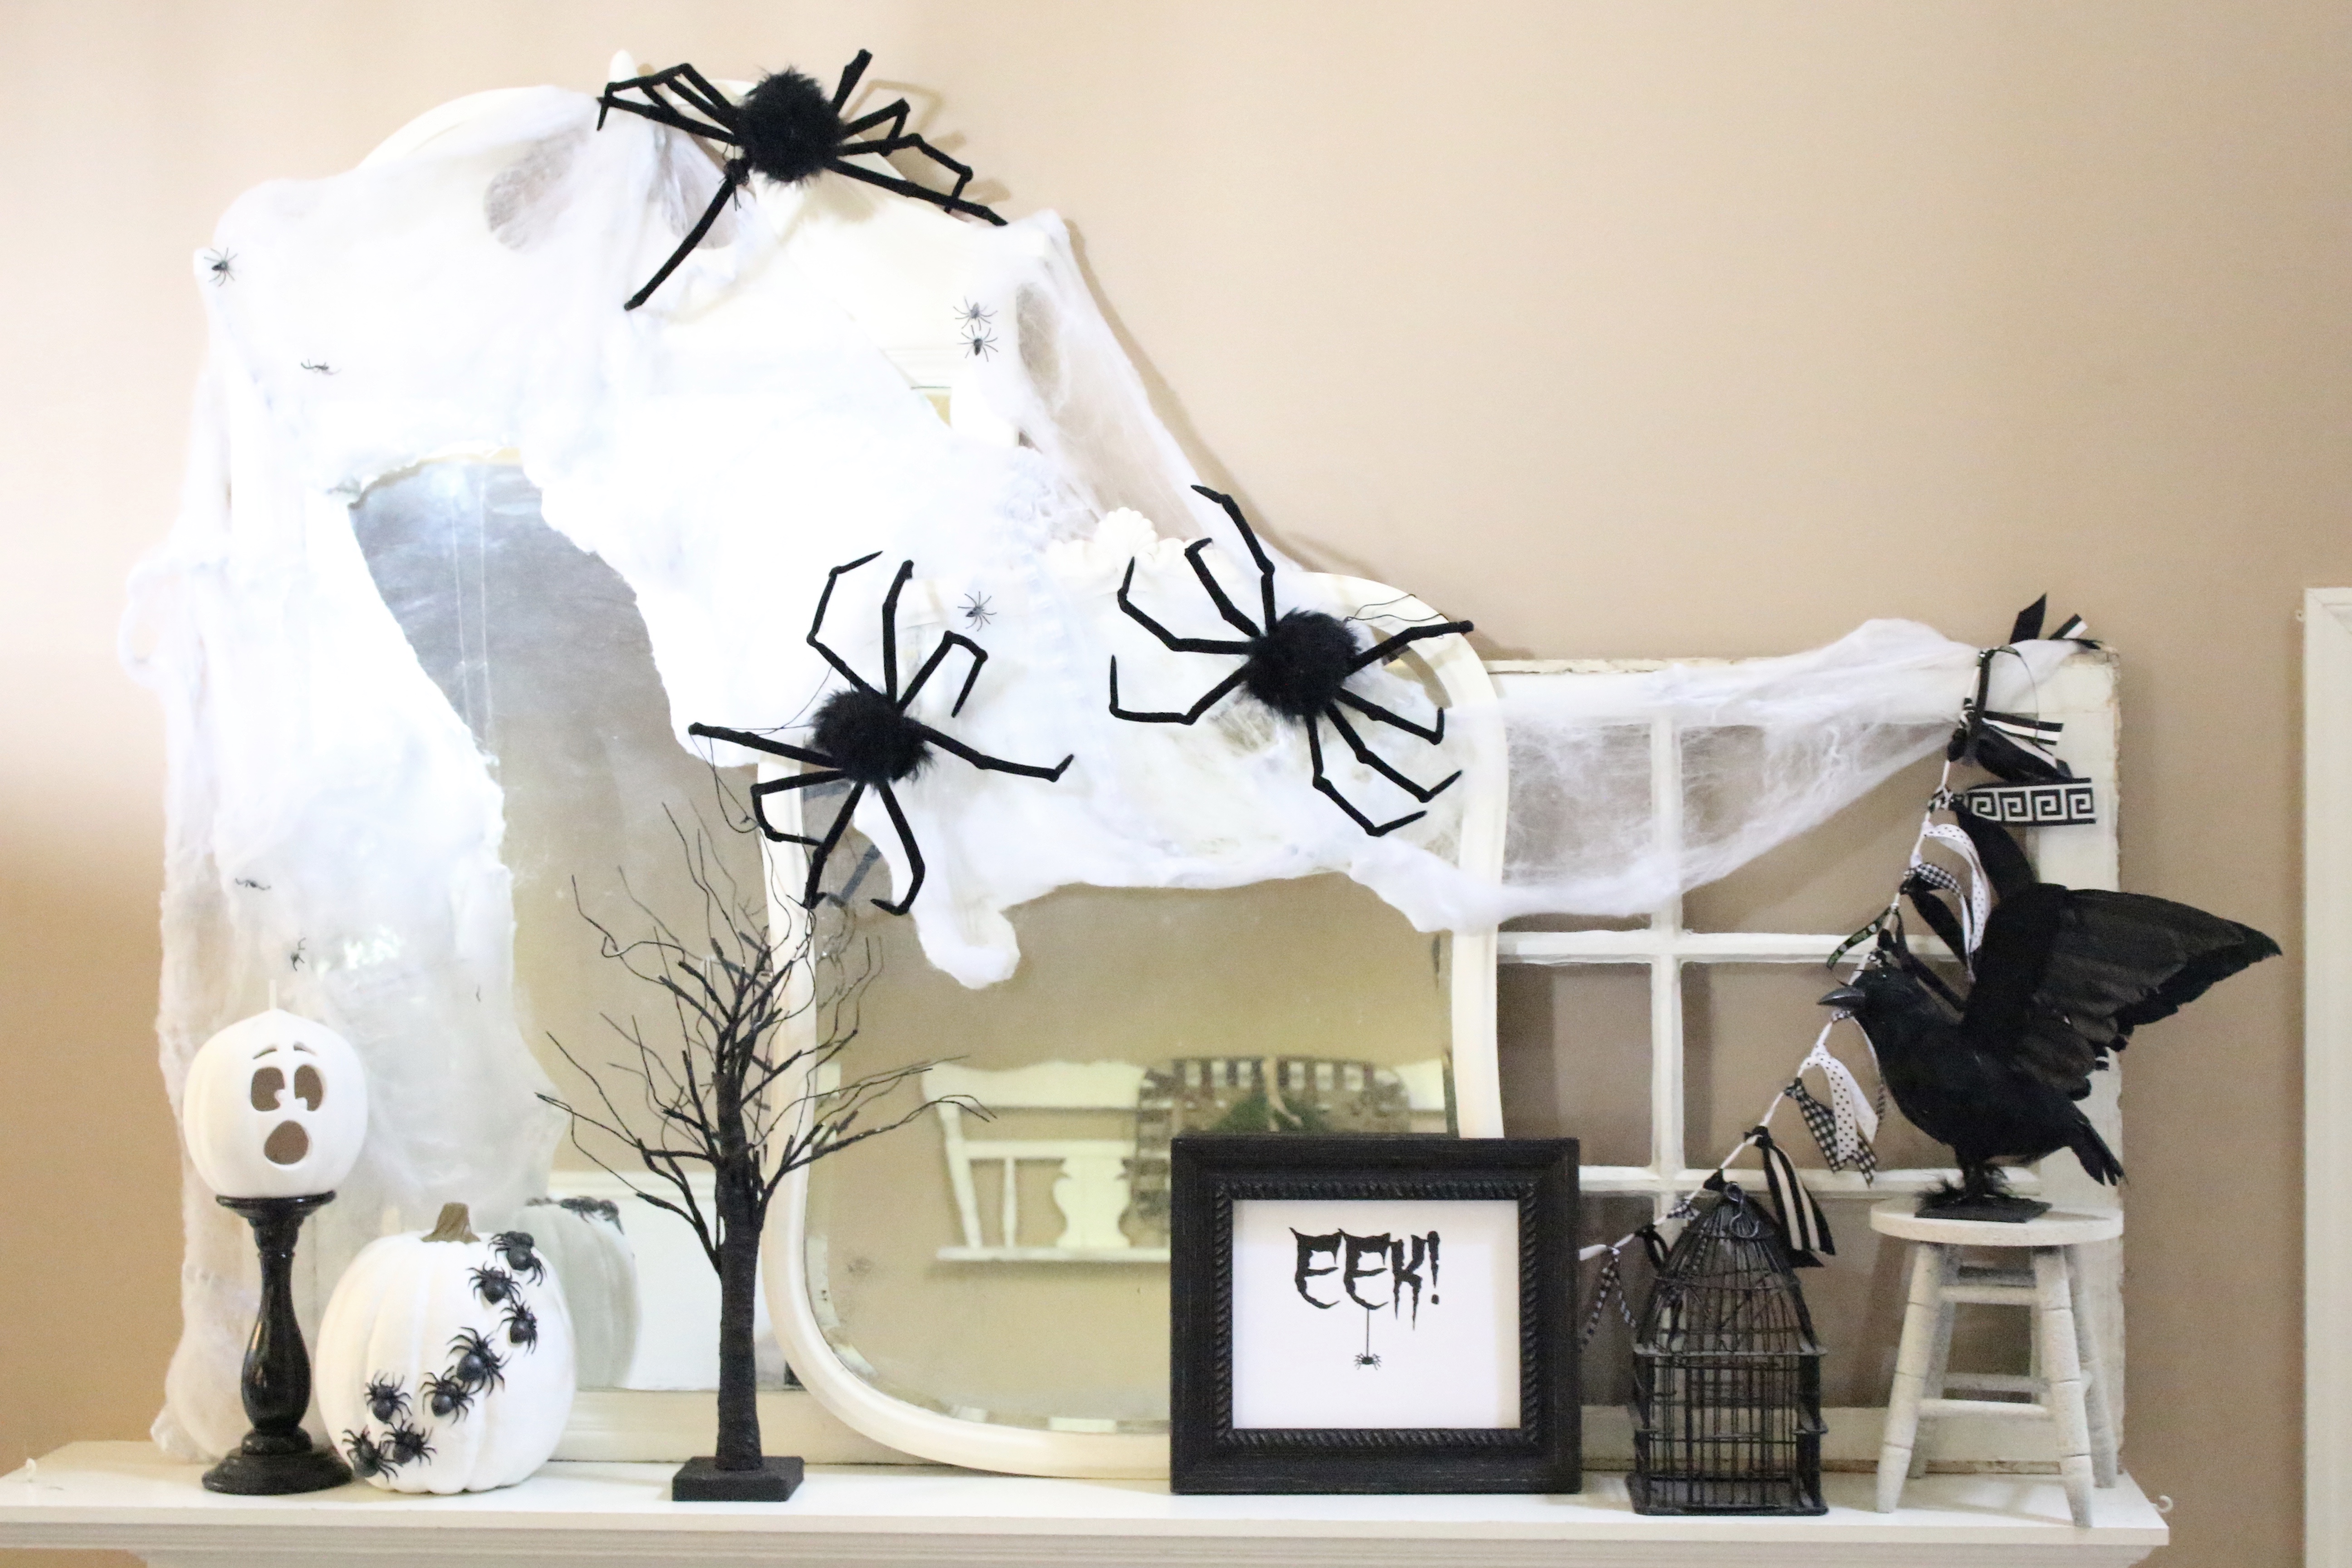 Halloween Mantel- decorated mantel for Halloween- Holidays- Halloween- black and white mantel- home decor